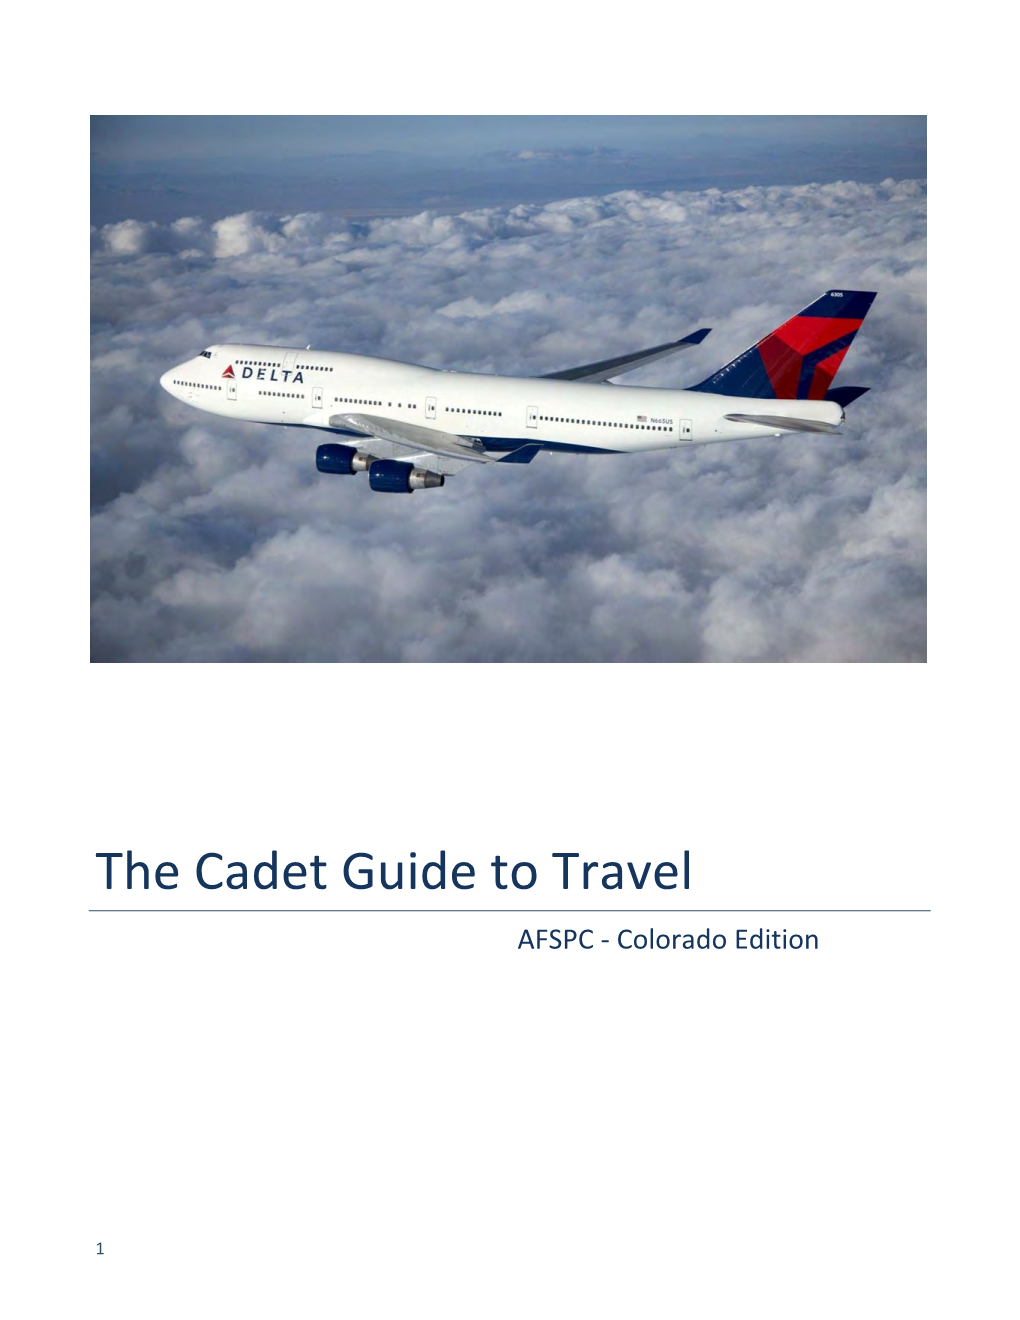 The Cadet Guide to Travel AFSPC - Colorado Edition